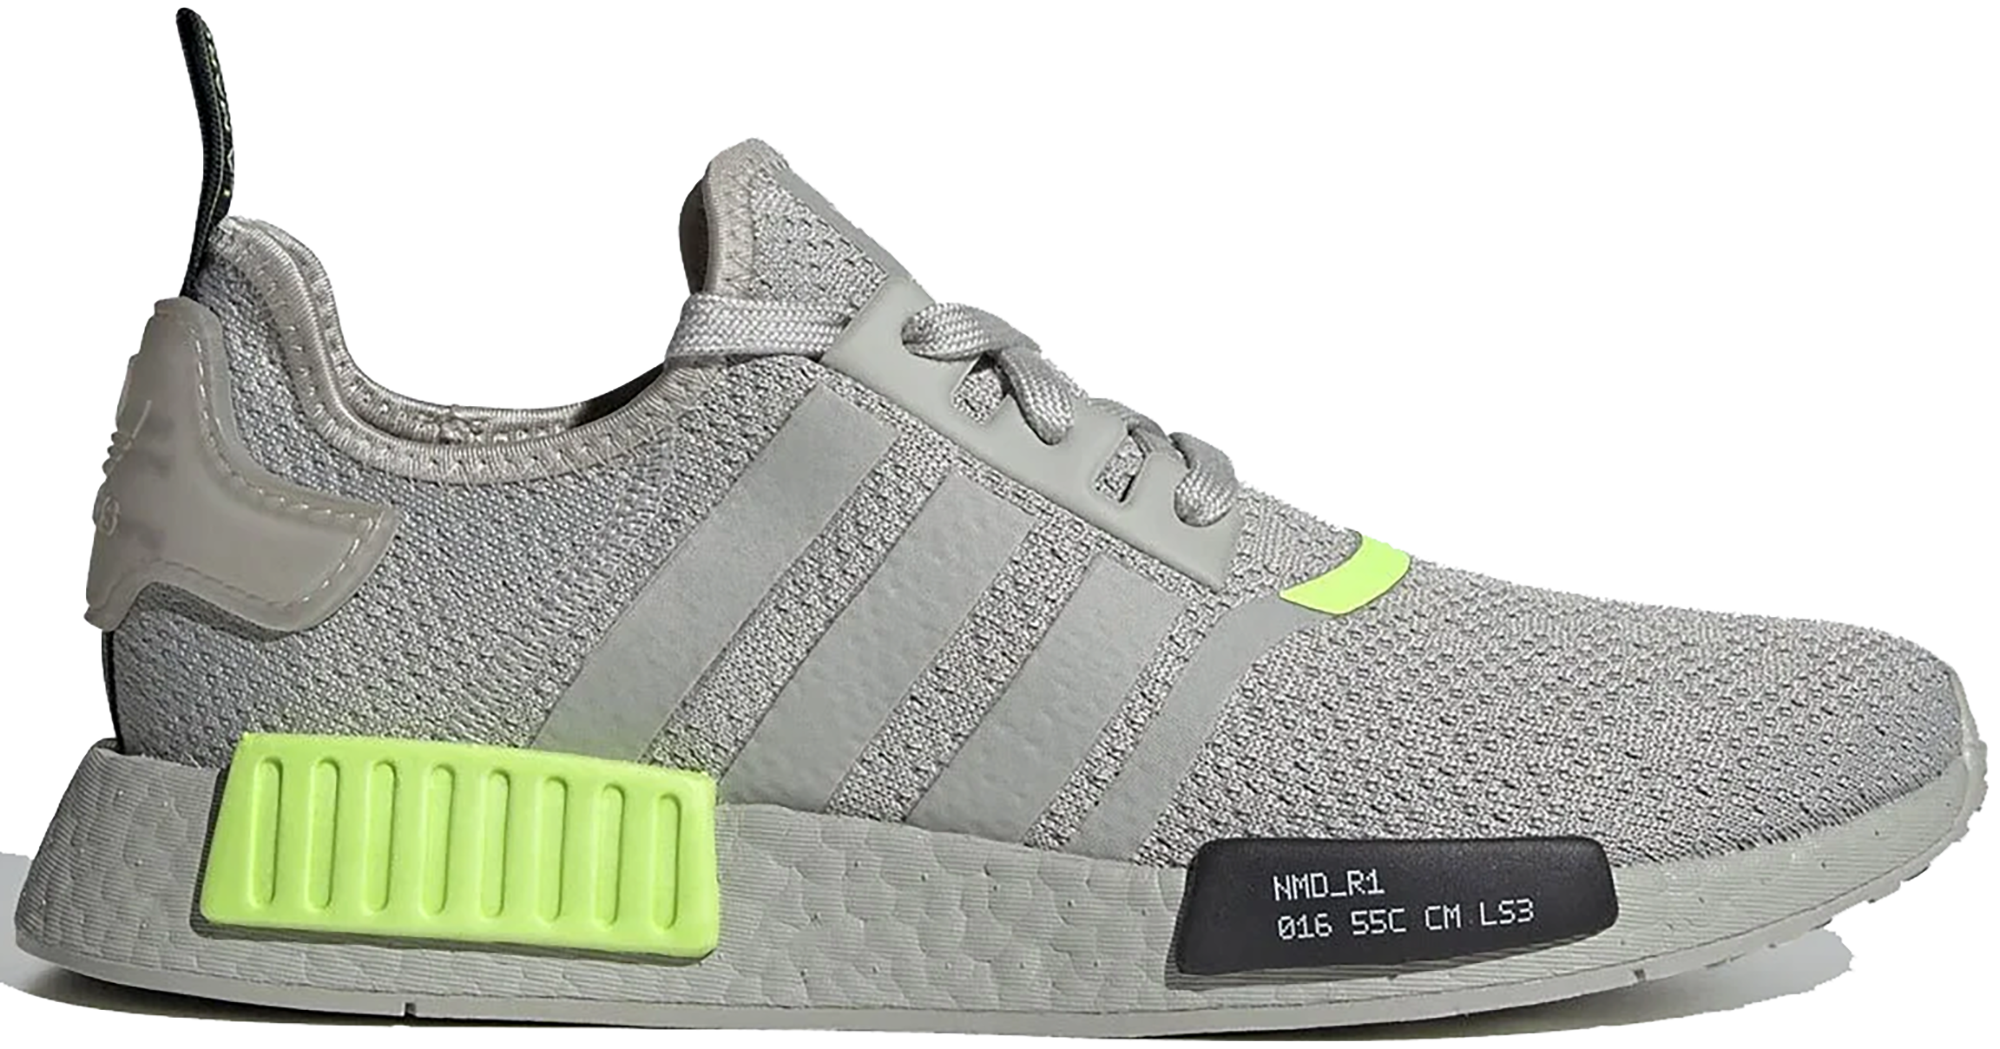 nmd r1 grey and black